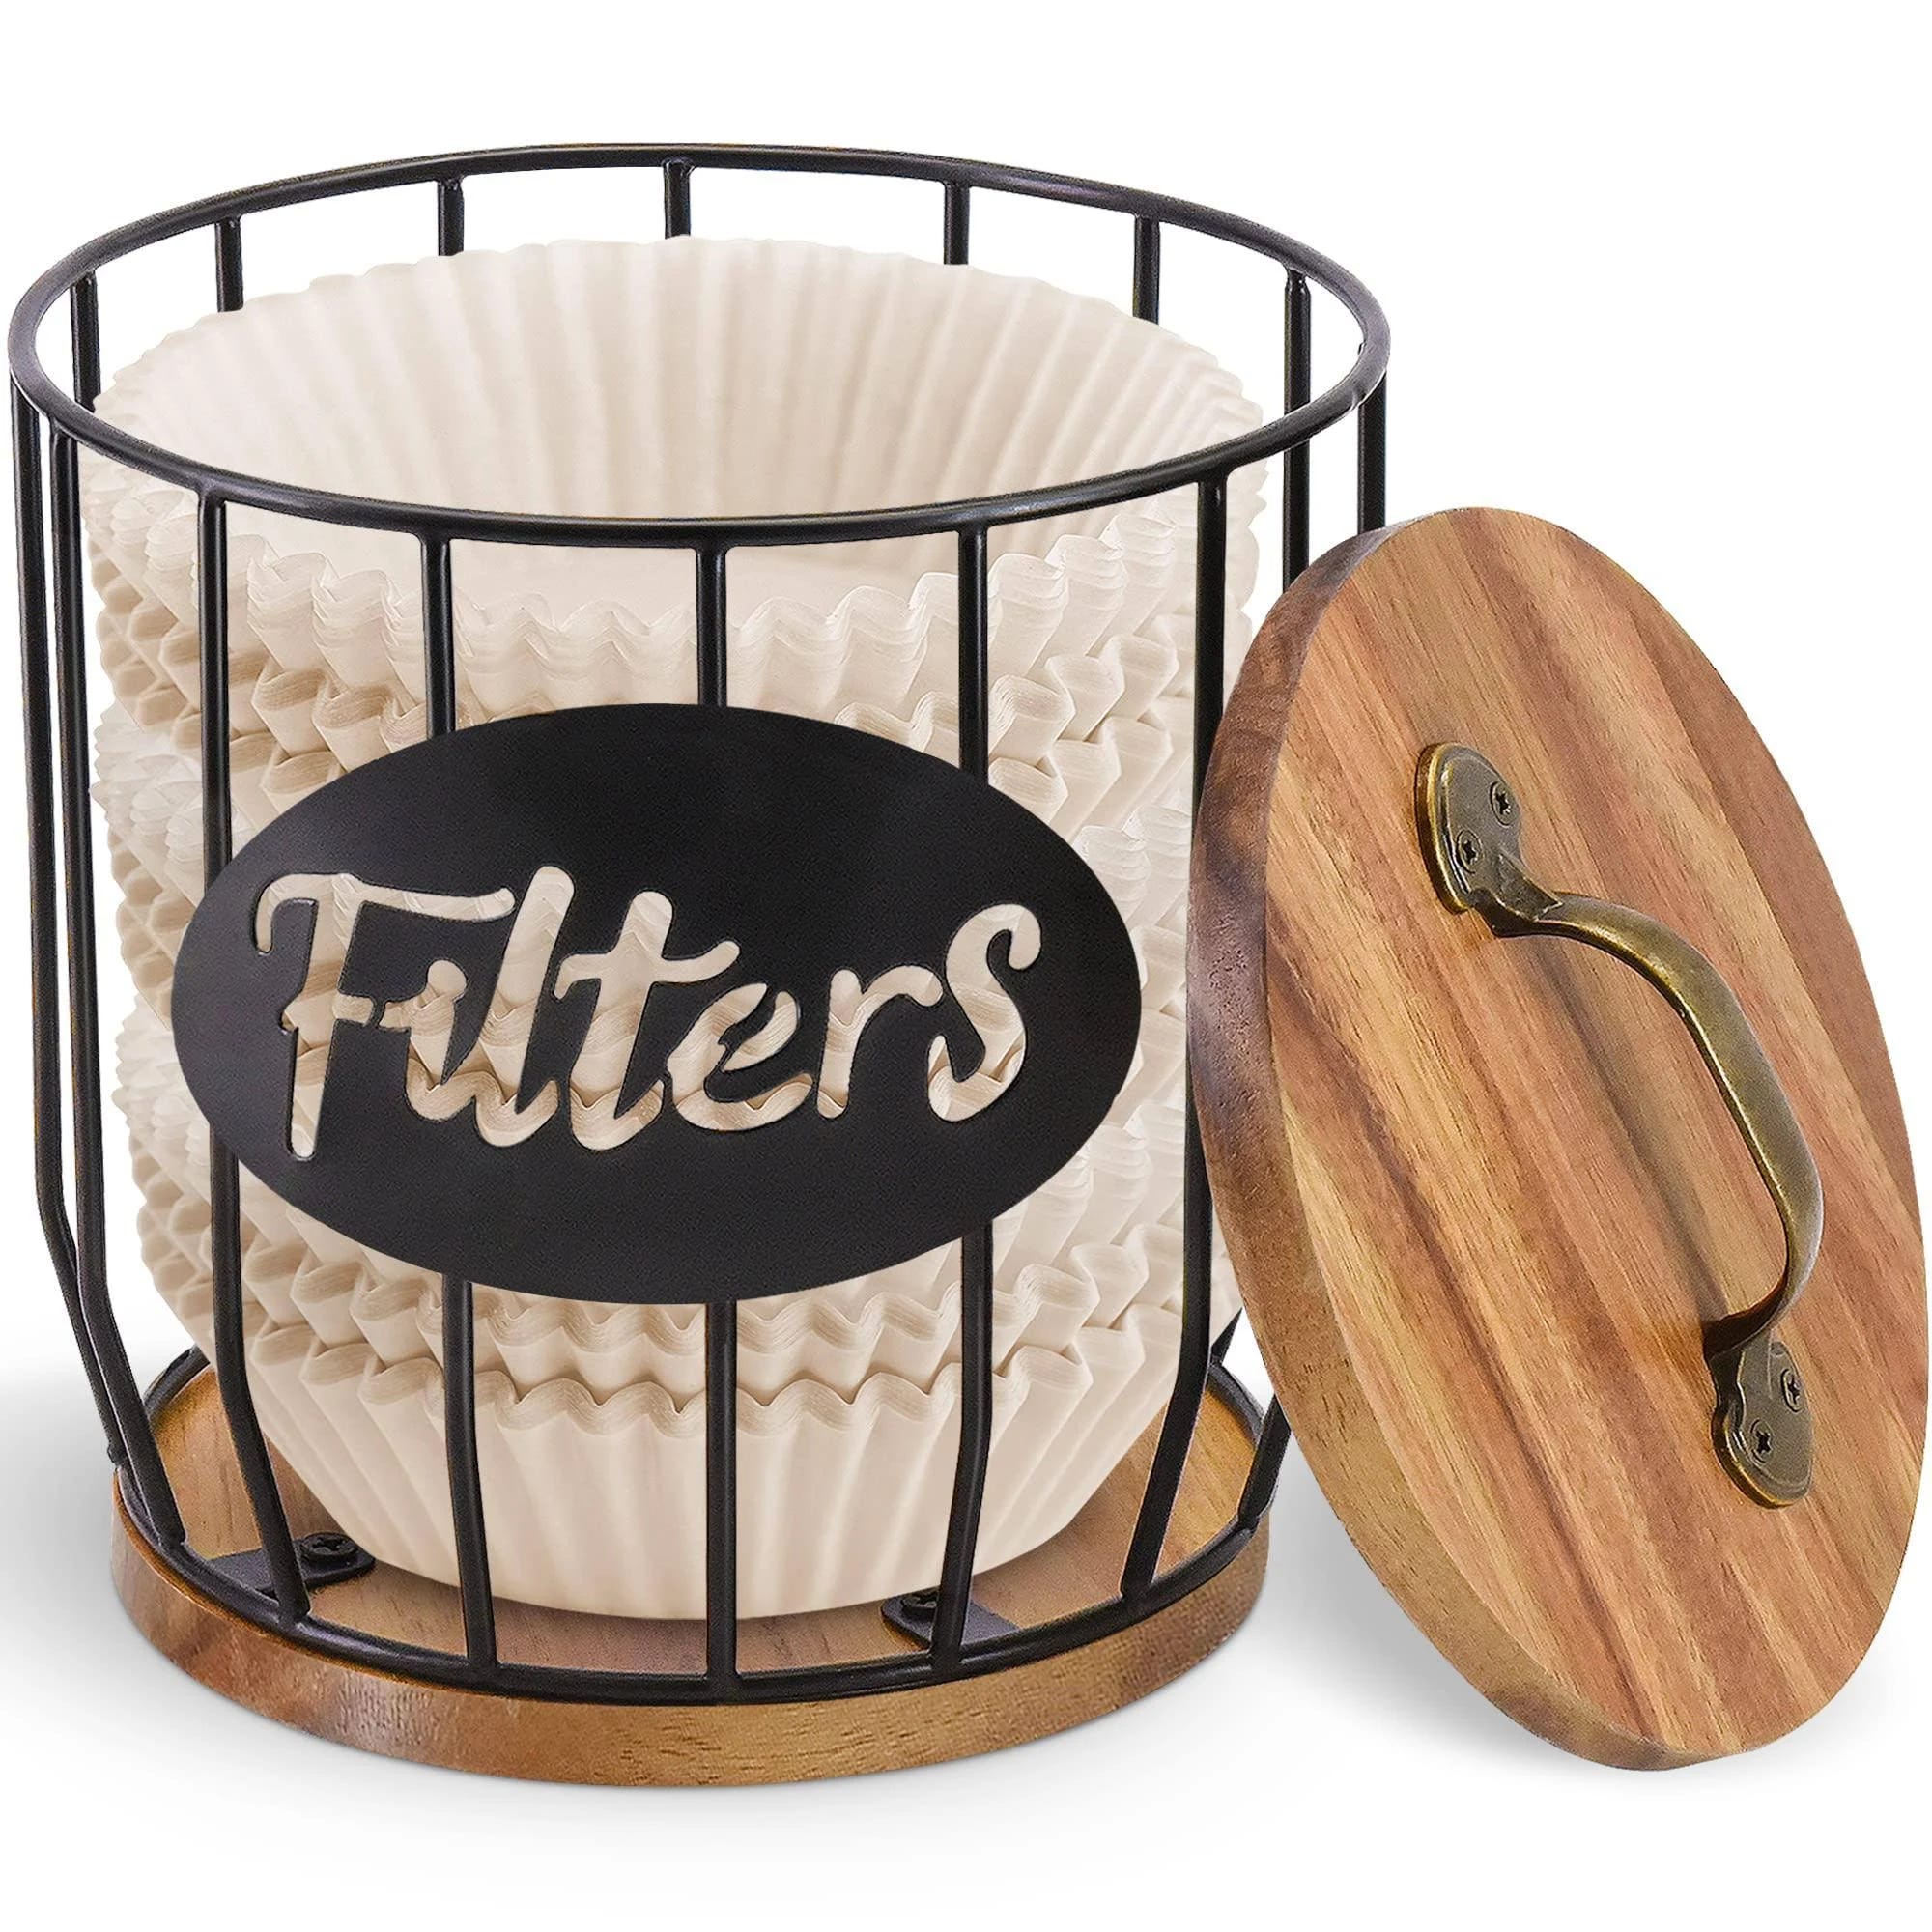 Rustic Acacia Coffee Filter Holder with Lid from Luneodoki | Image